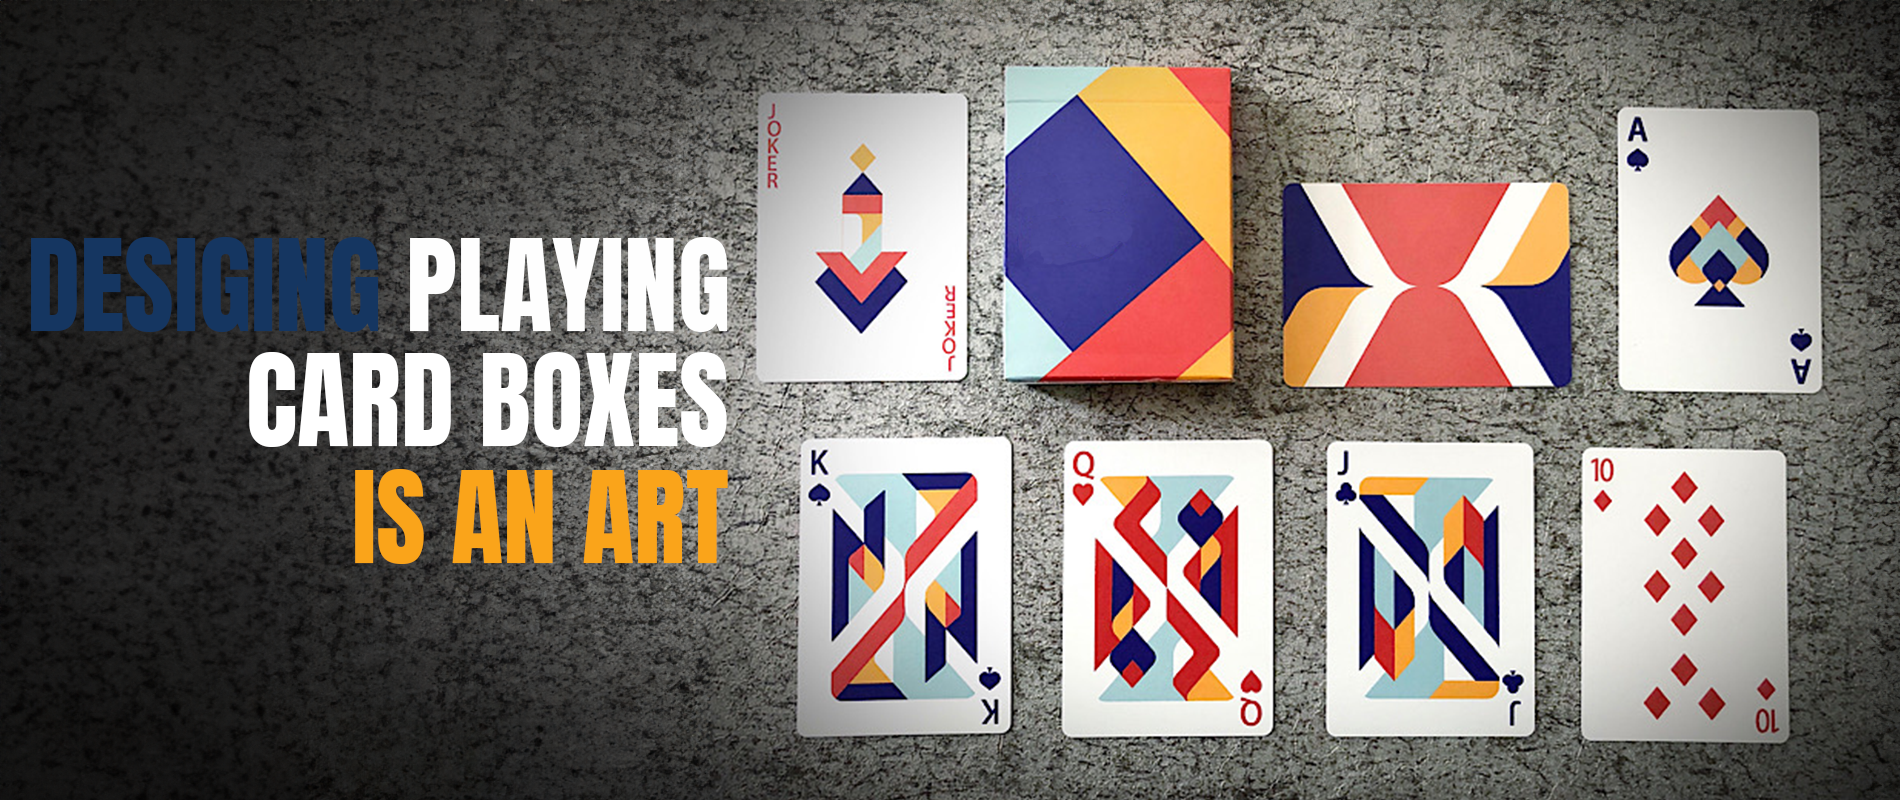 playing-card-boxes-style